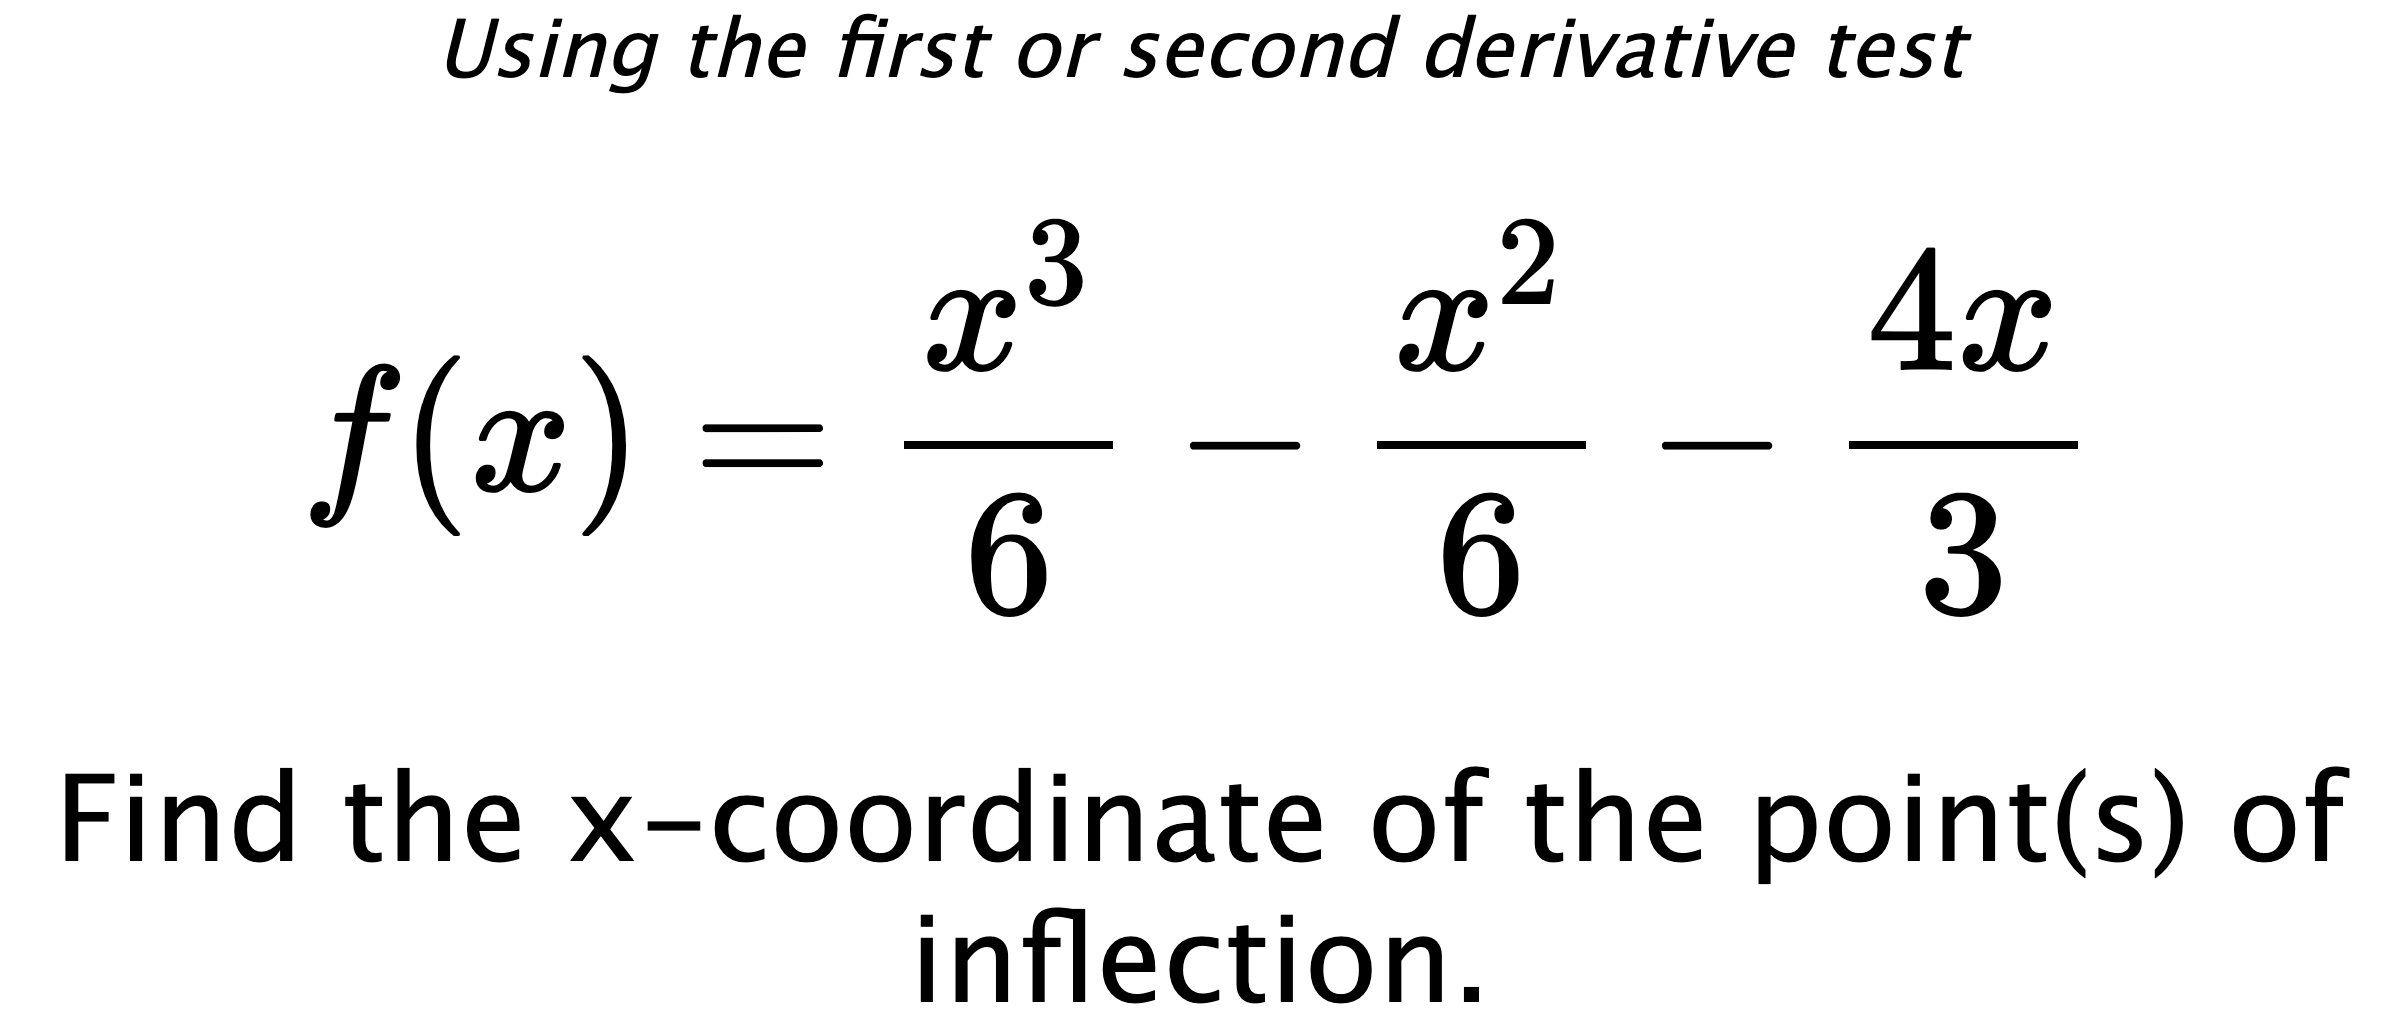 Using the first or second derivative test $$ f(x)=\frac{x^3}{6}-\frac{x^2}{6}-\frac{4x}{3} $$ Find the x-coordinate of the point(s) of inflection.